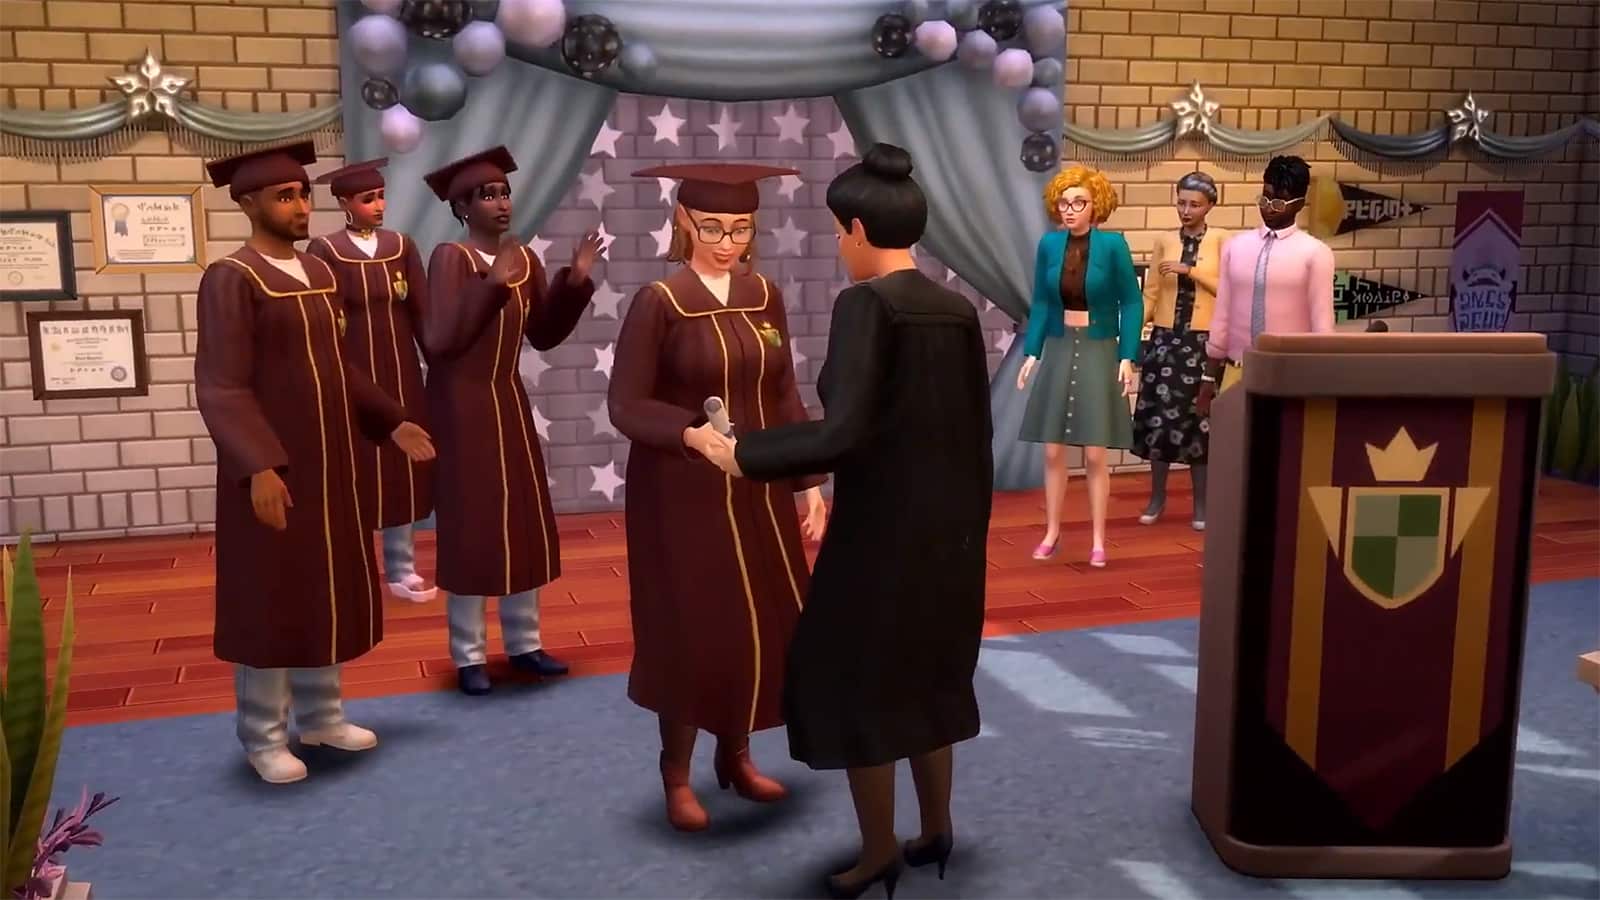 Sims graduating in High School in The Sims 4 expansion pack